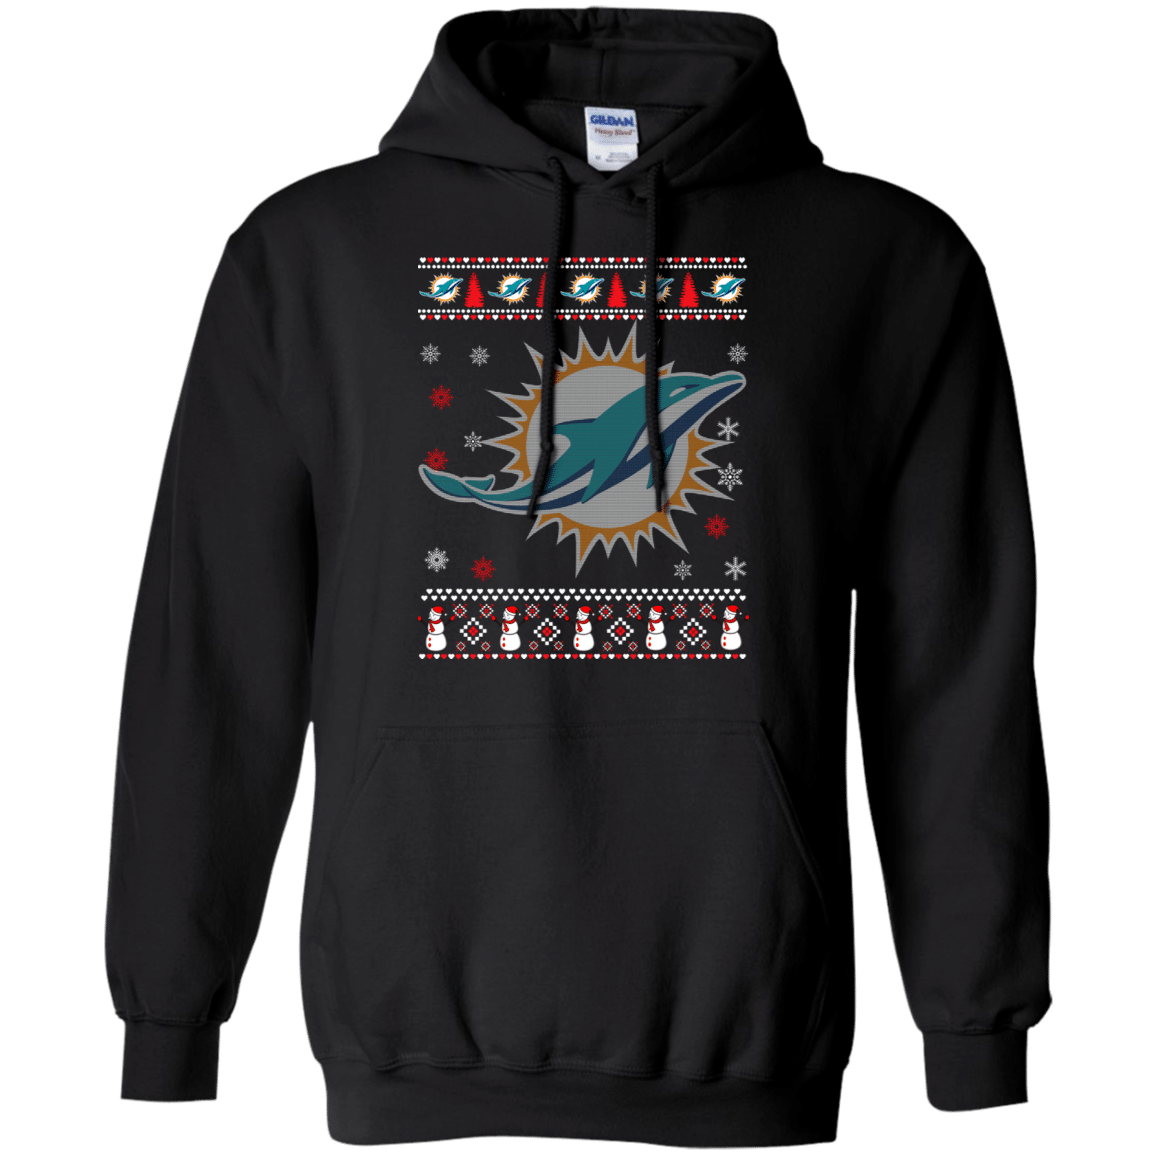 Miami Dolphins Shop - Check out this awesome Miami Dolphins Christmas Ugly Christmas Sweater Hoodie 2